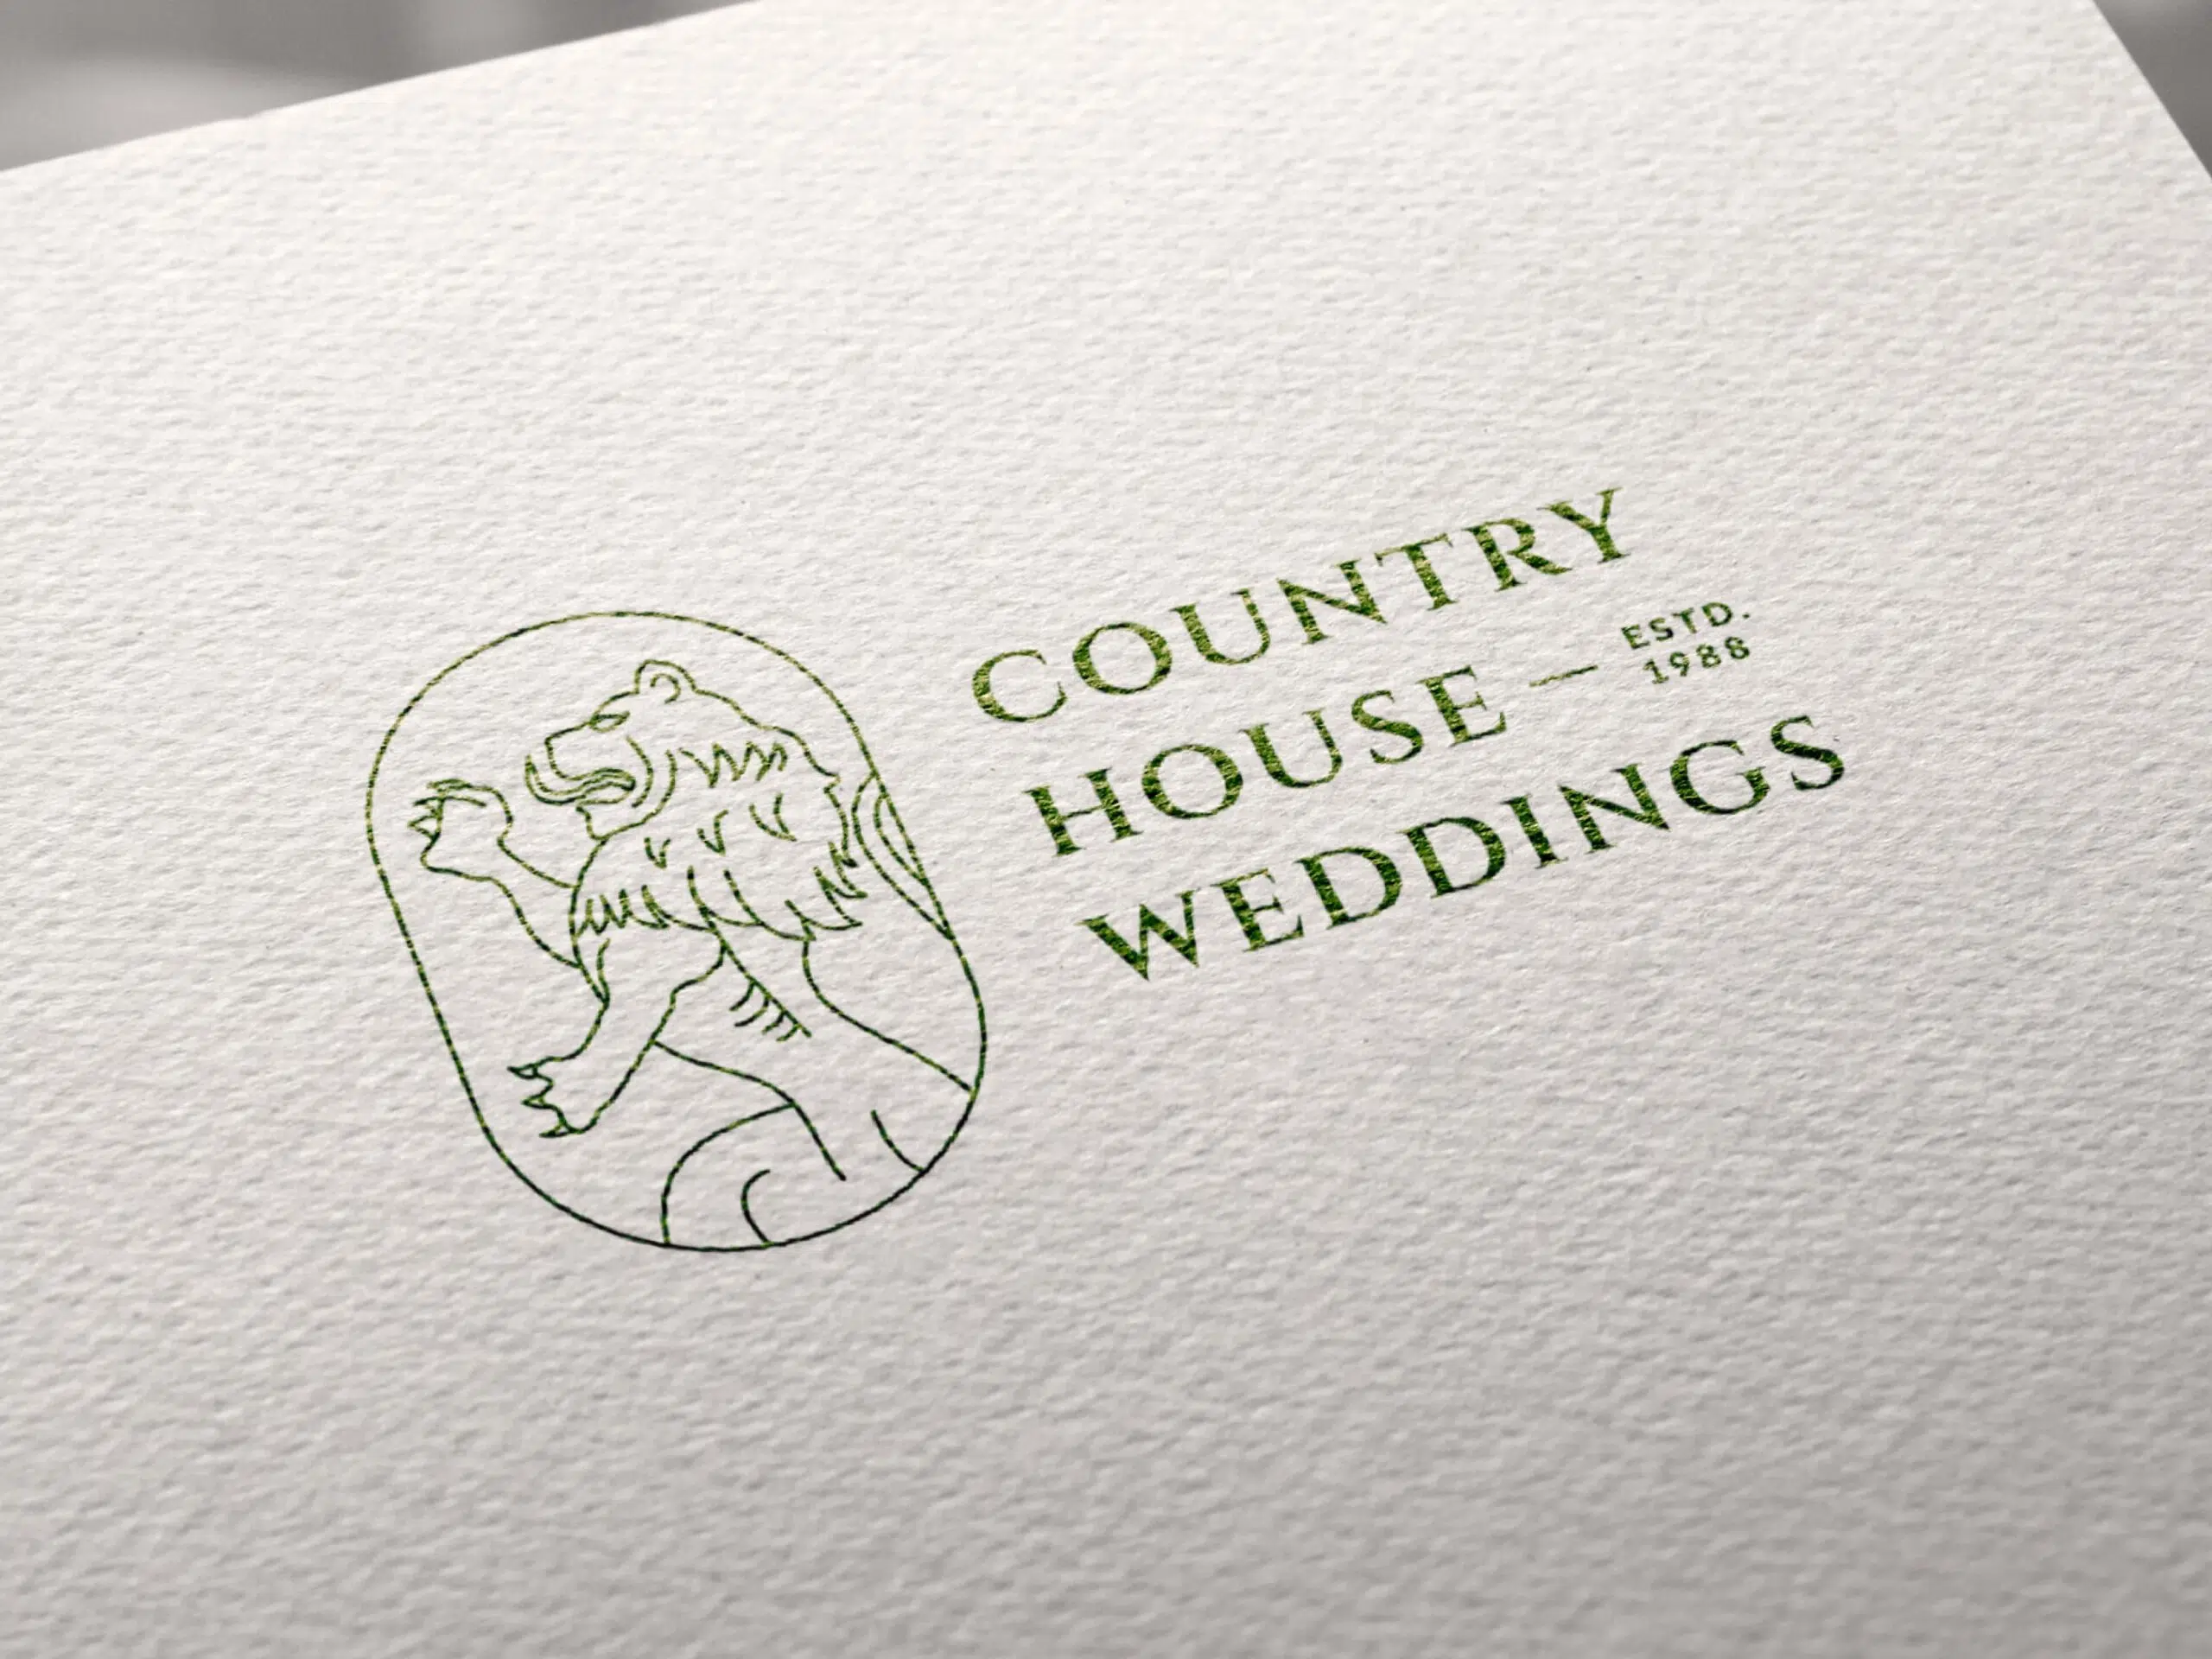 The Country House Weddings logo printed on textured paper